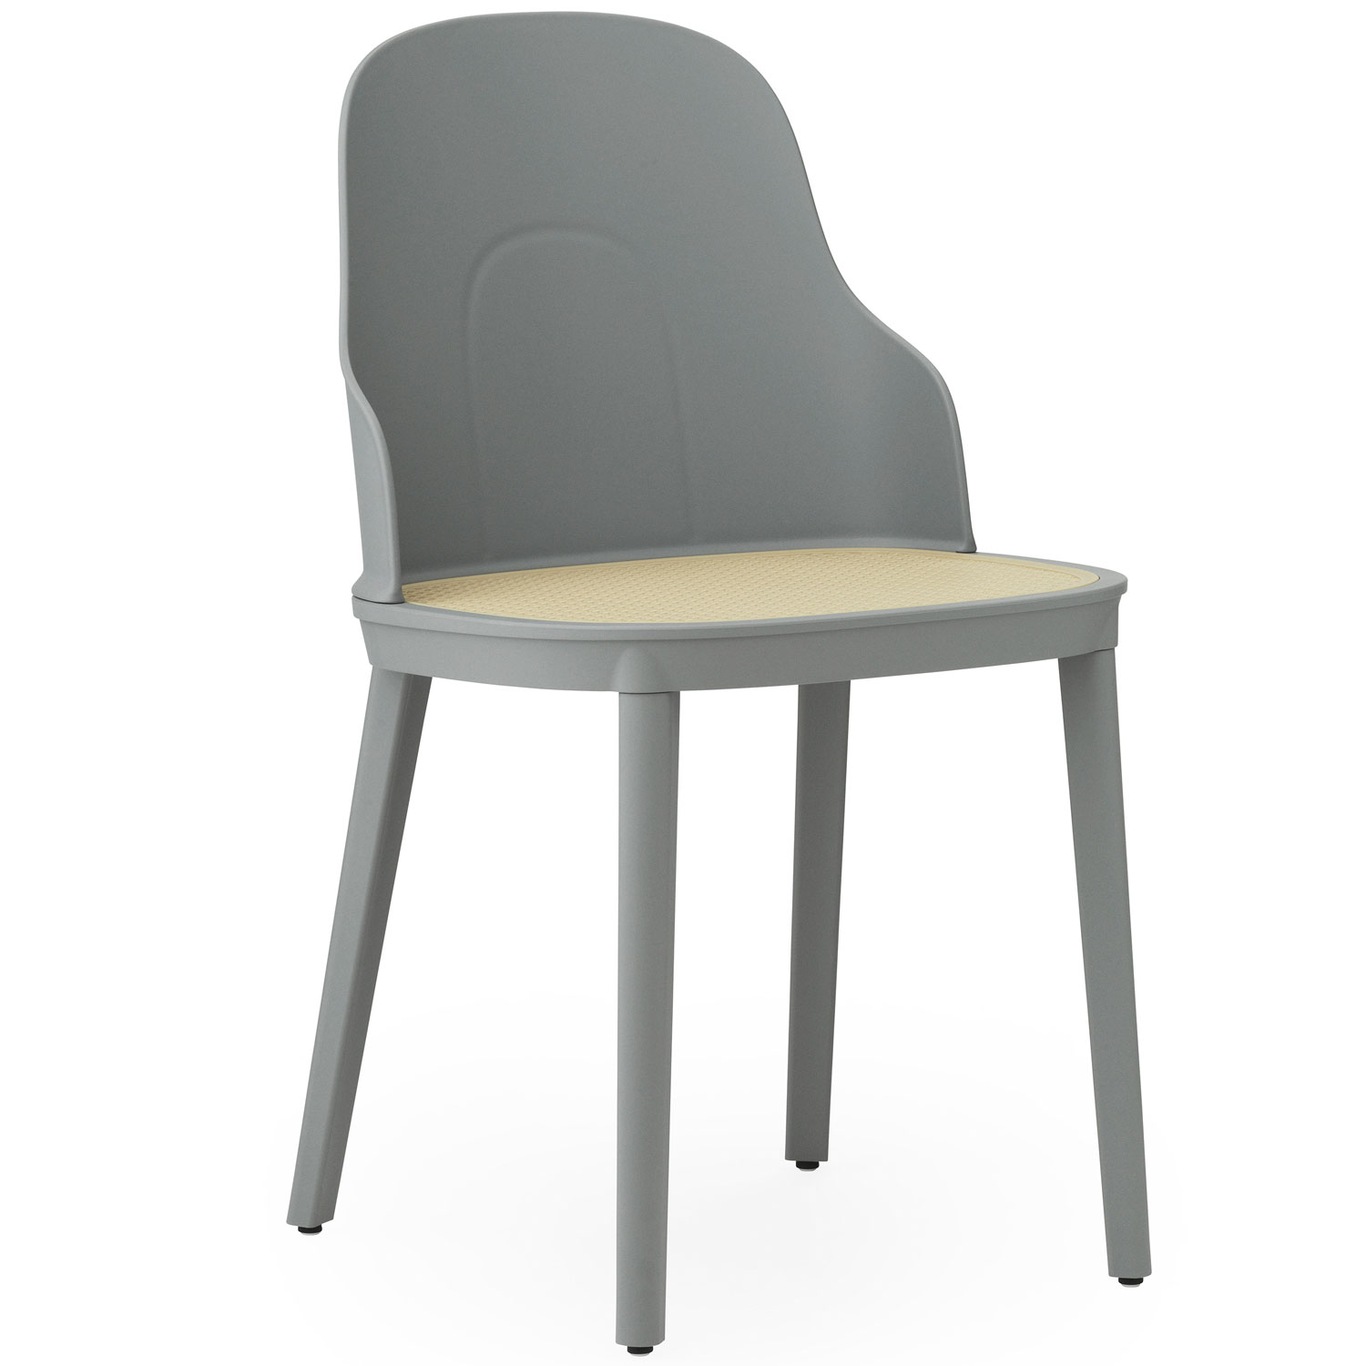 Allez Chair With Moulded Weave, Grey